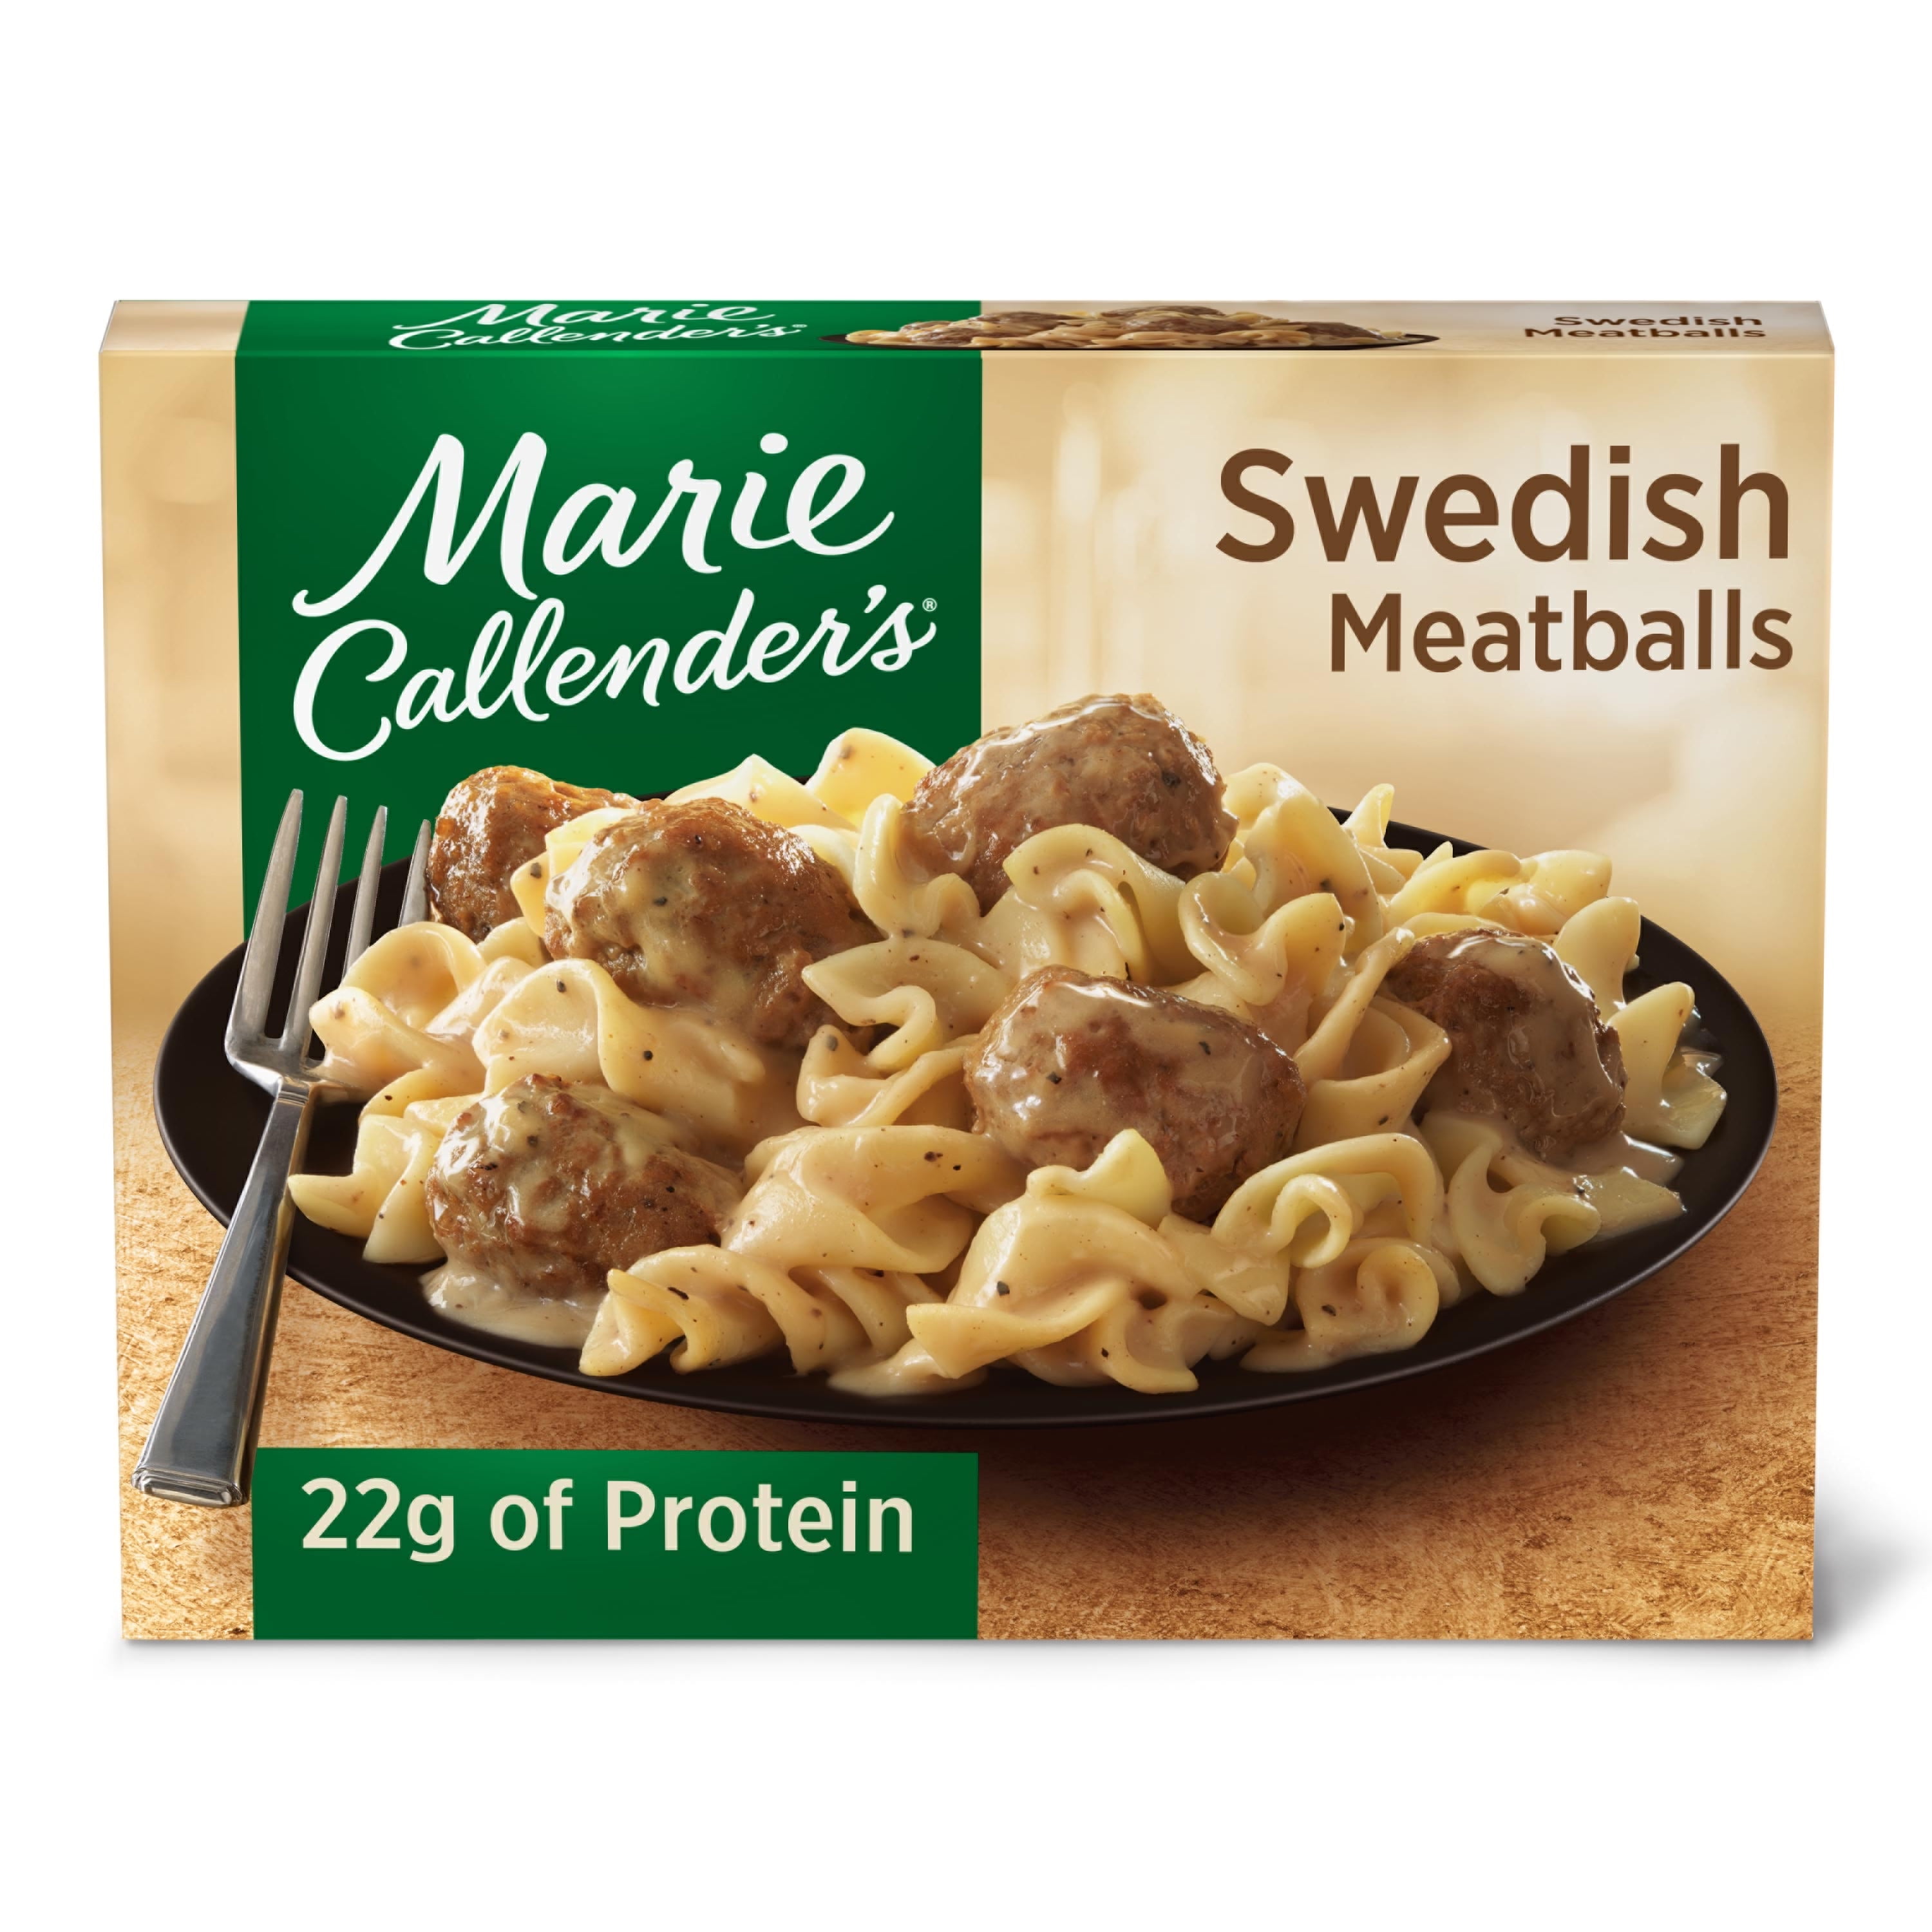 Pasta Marie Callender Frozen Dinners / Marie Callenders Meal for Two Multi-Serve Frozen Dinner ... / I can always count on this grilled chicken alfredo.